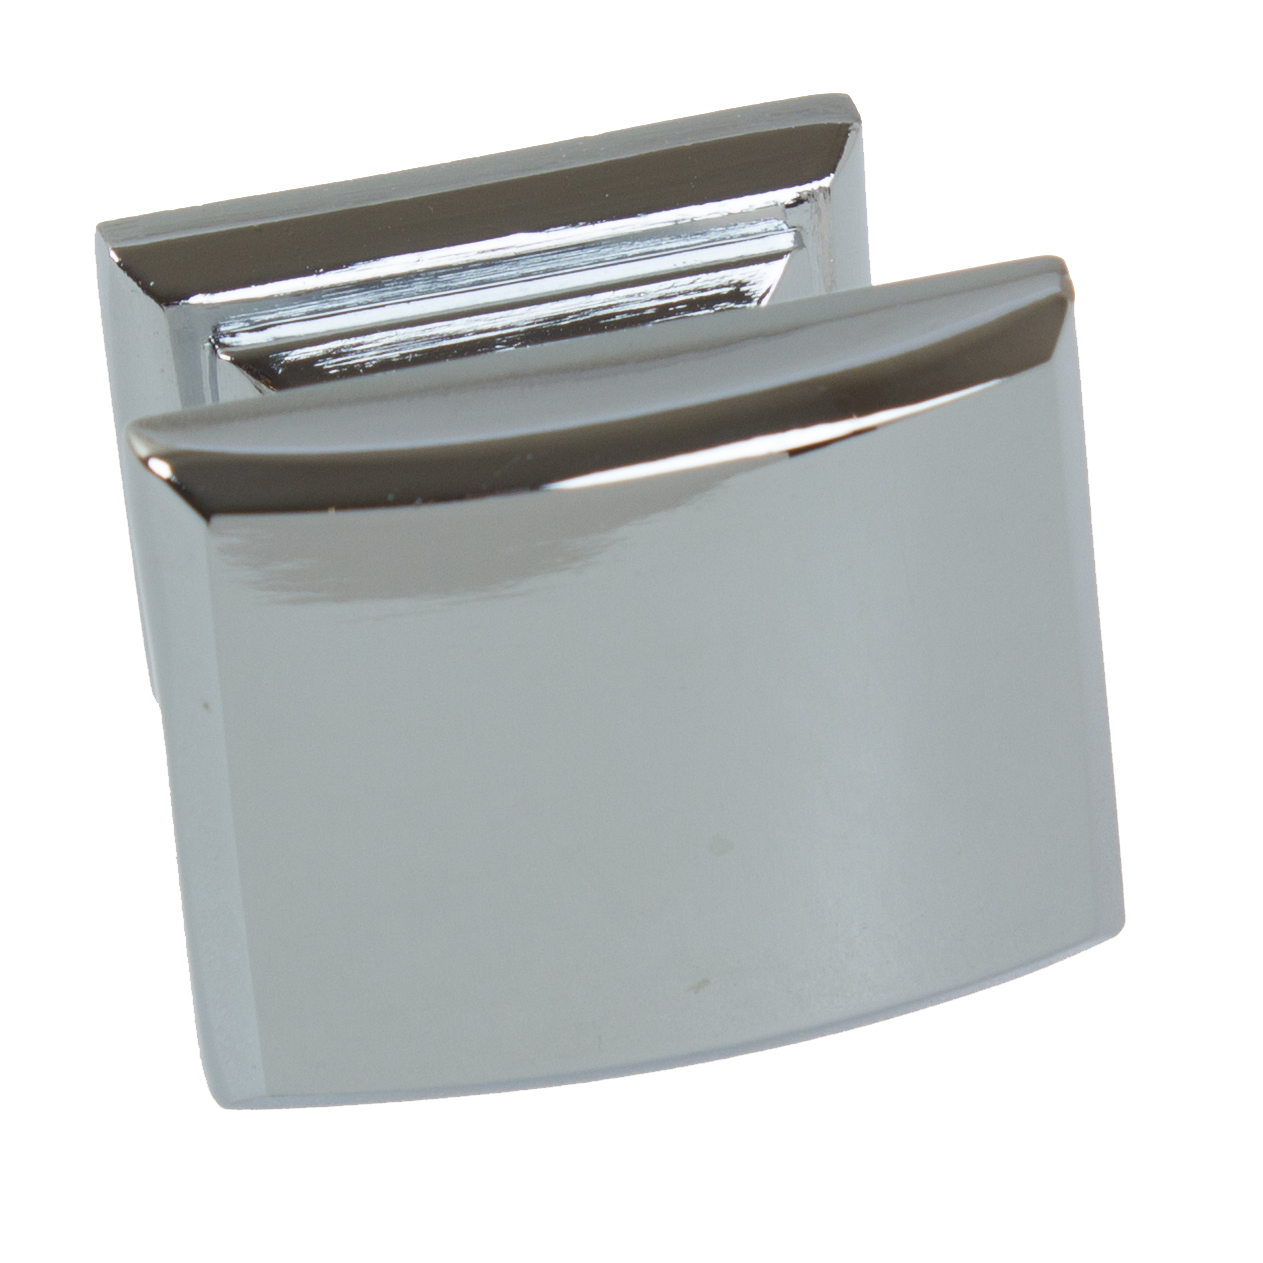 GlideRite 1-1/4 in. Domed Convex Square Cabinet Knob, Polished Chrome, Pack of 10 - image 2 of 5